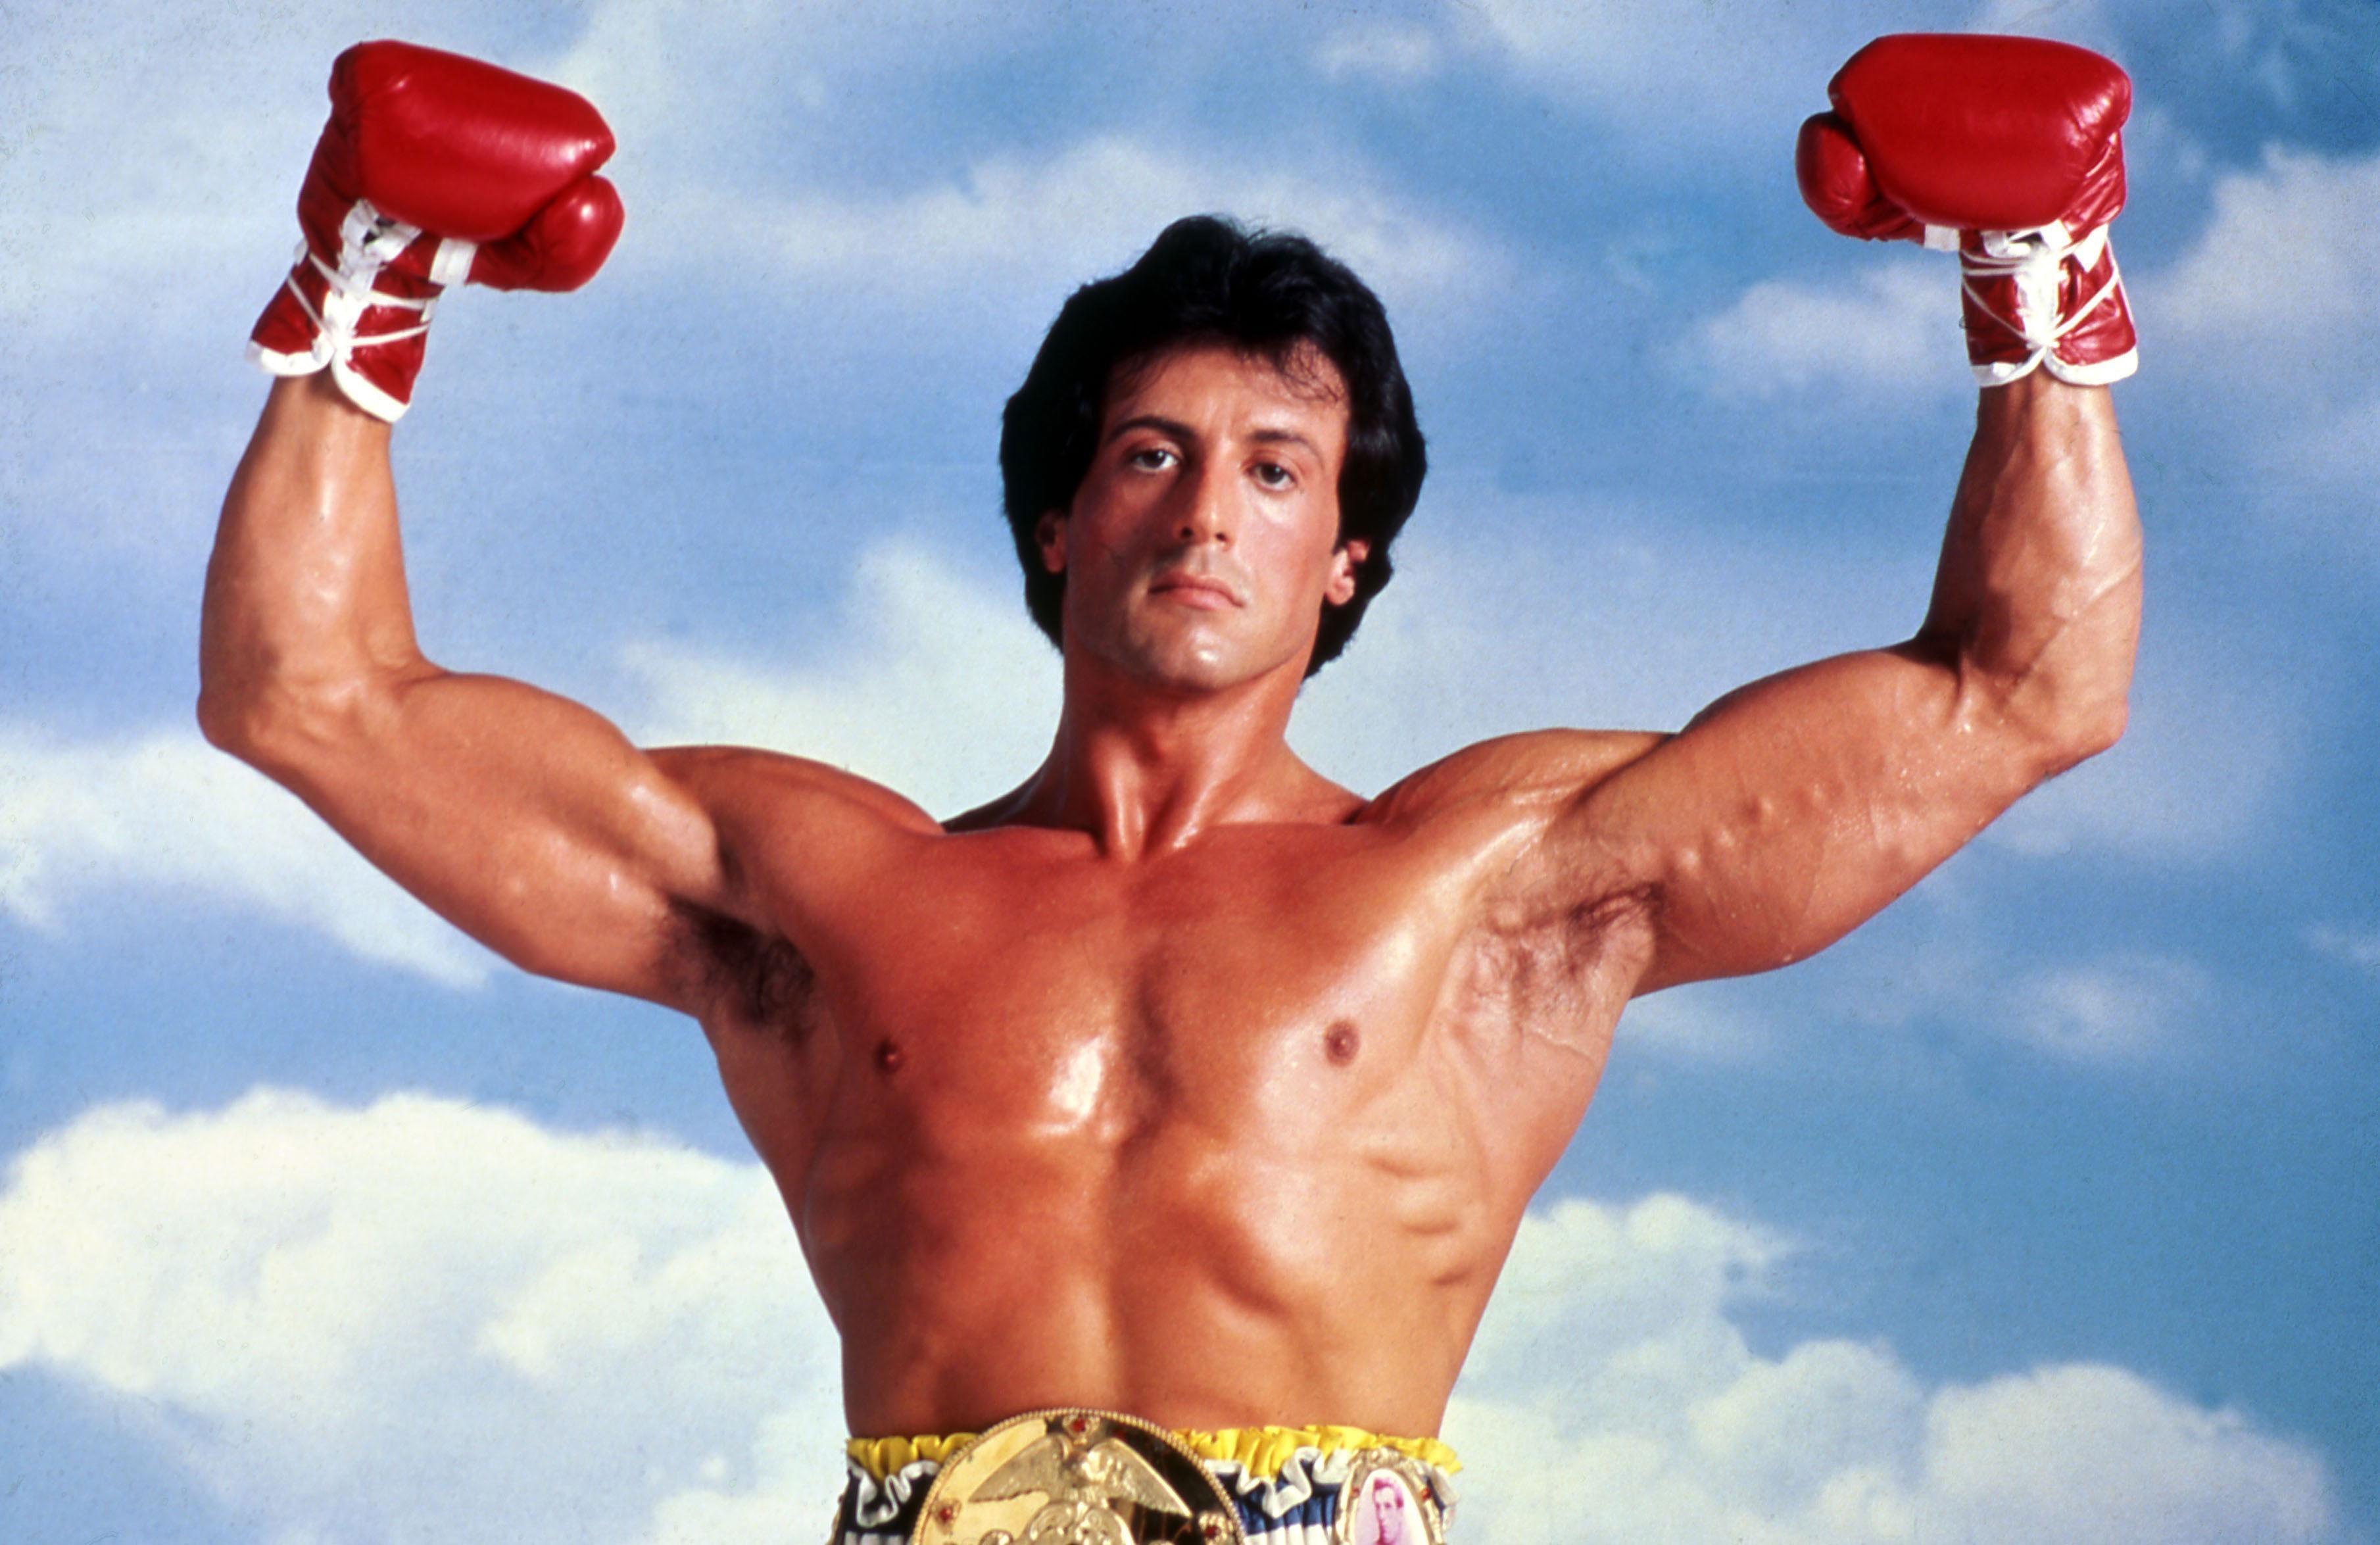 Sylvester Stallone, glorieux, dans "Rocky III". [Collection Cinema/AFP - Photo12.com]